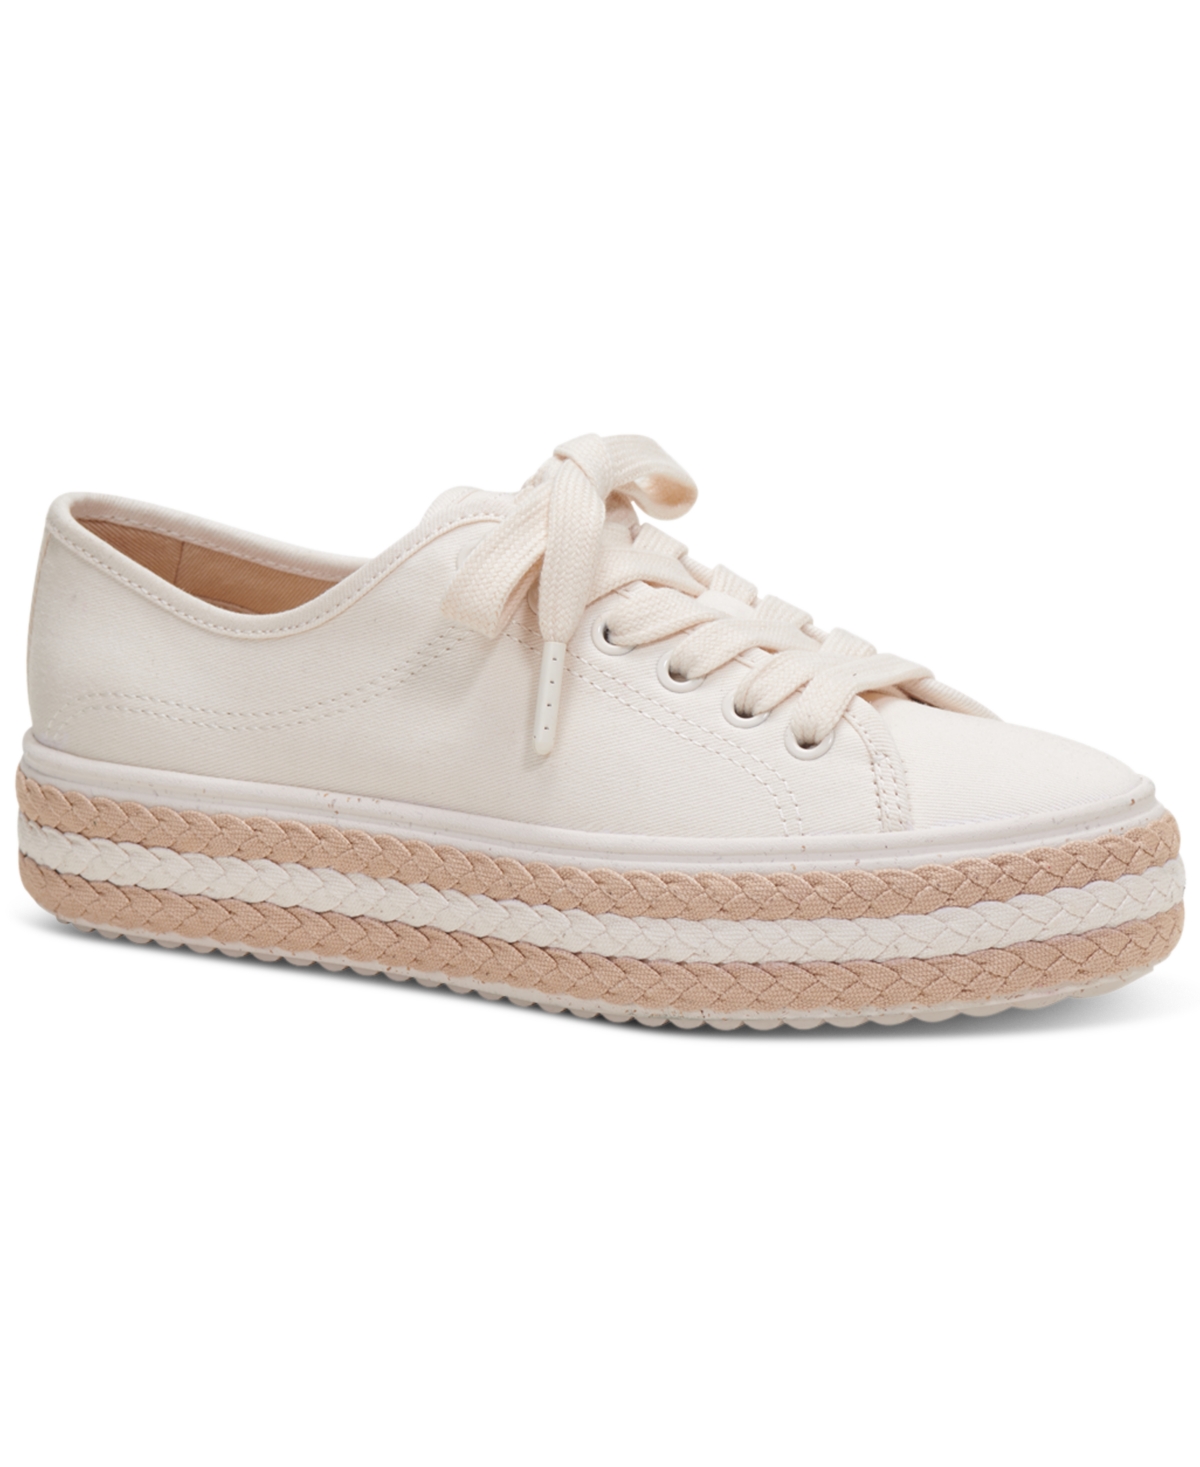 Women's Taylor Lace-Up Low-Top Sneakers - Cream